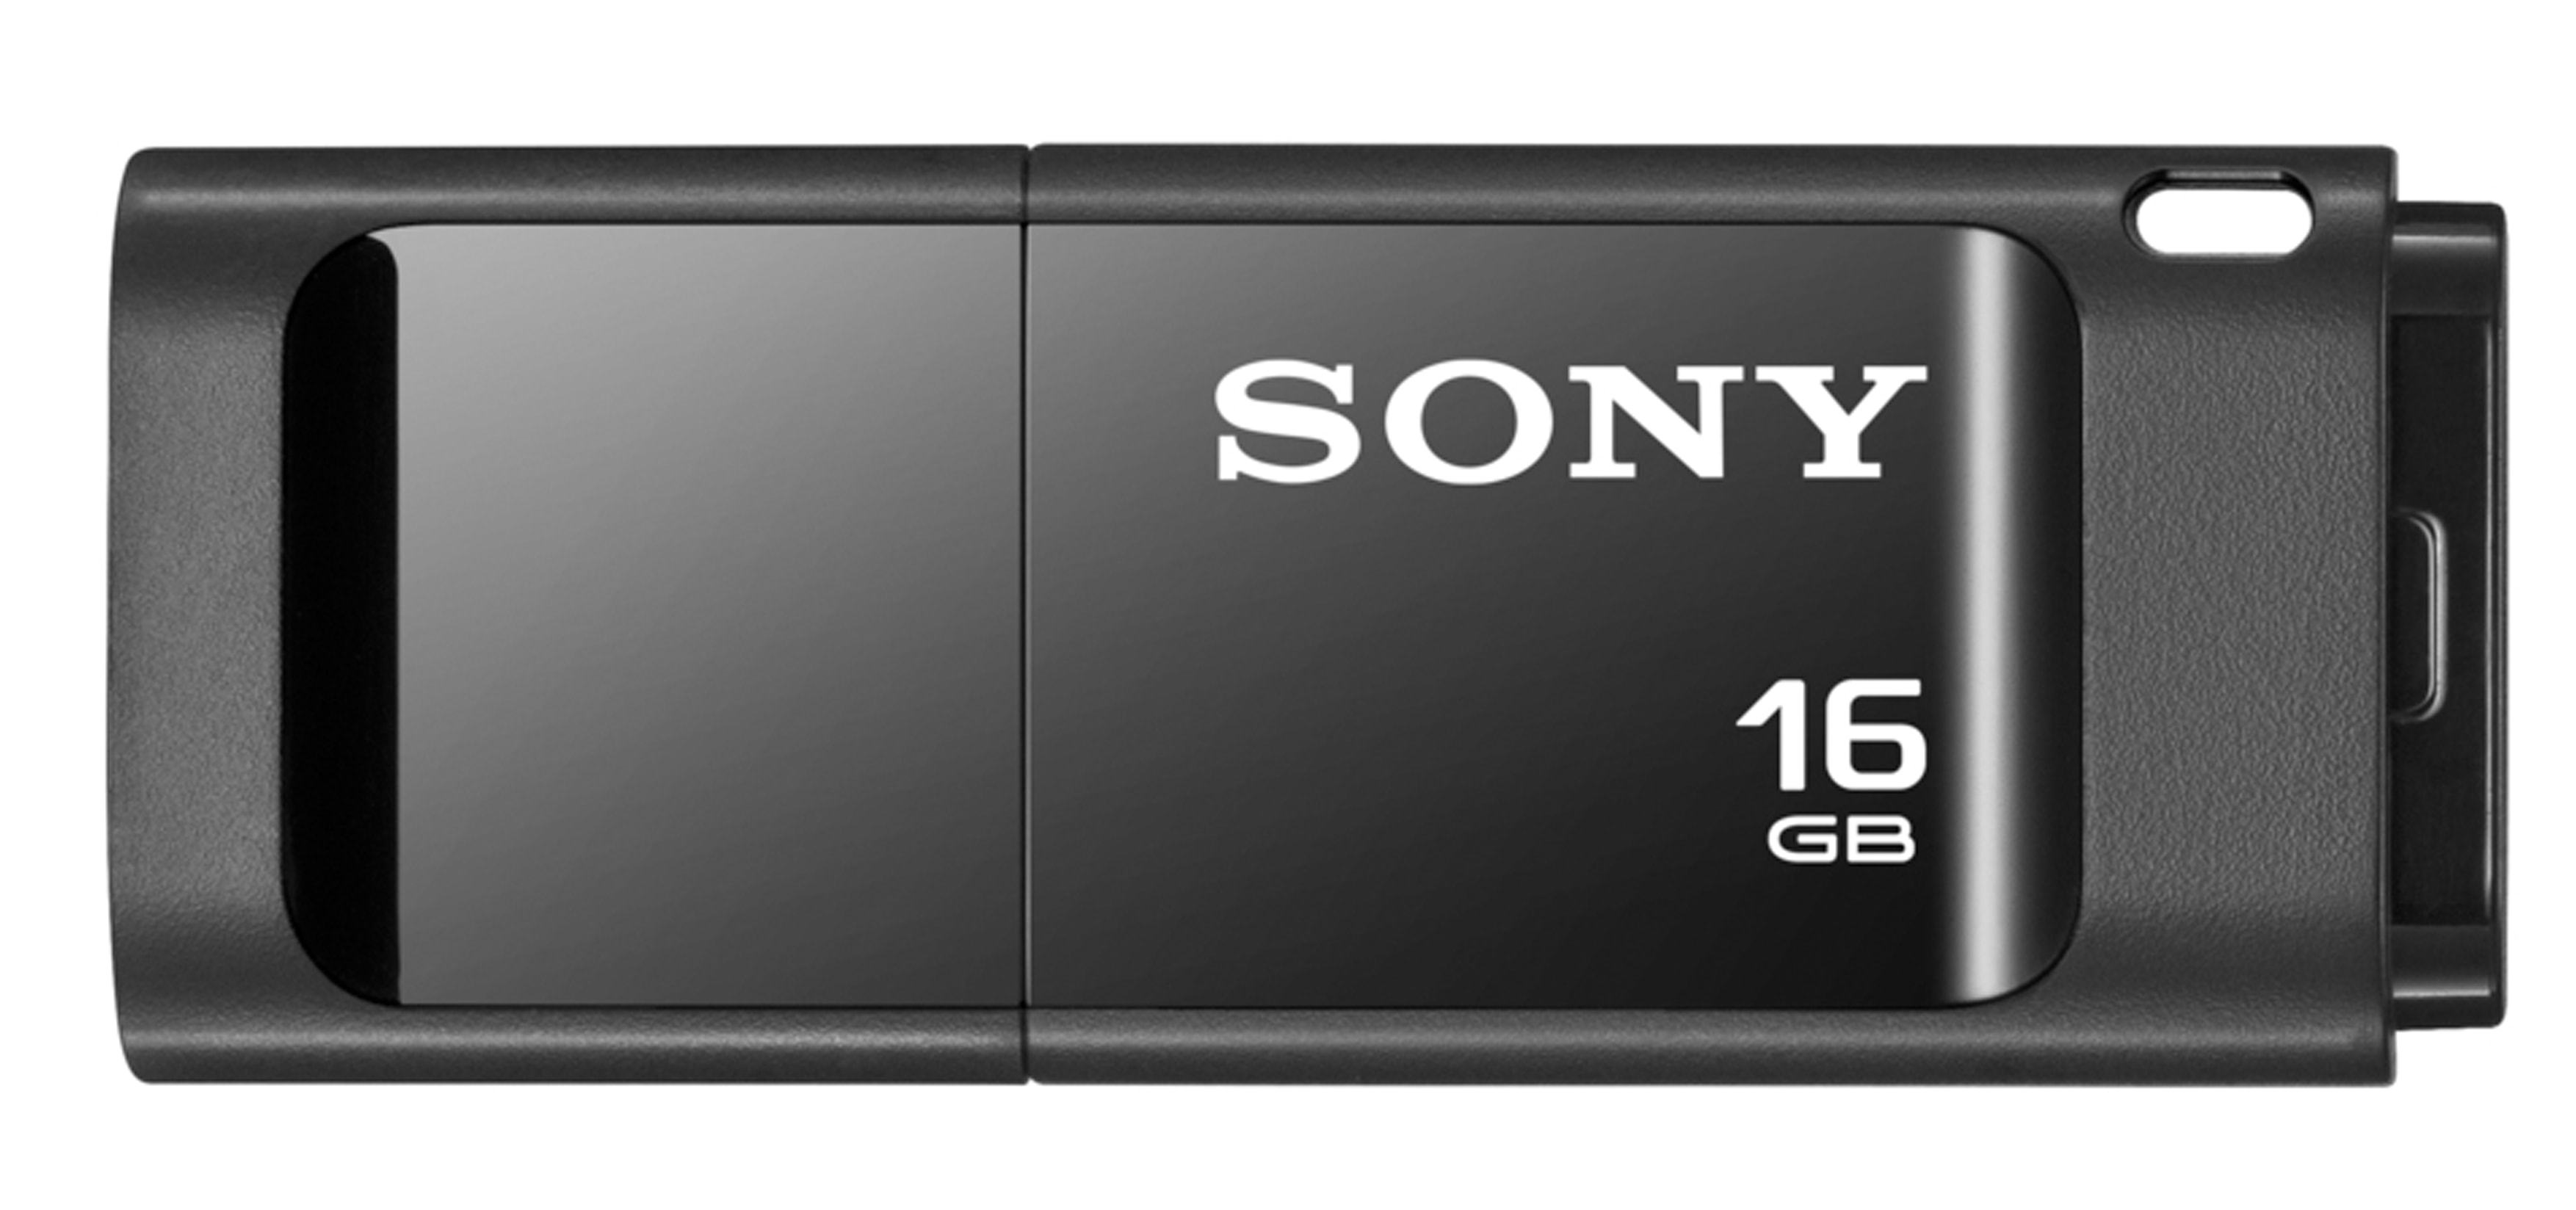 SONY 16 GB Microvault USB Flash Drive 3.0 for sale with Makro Outlet and bidorbuy